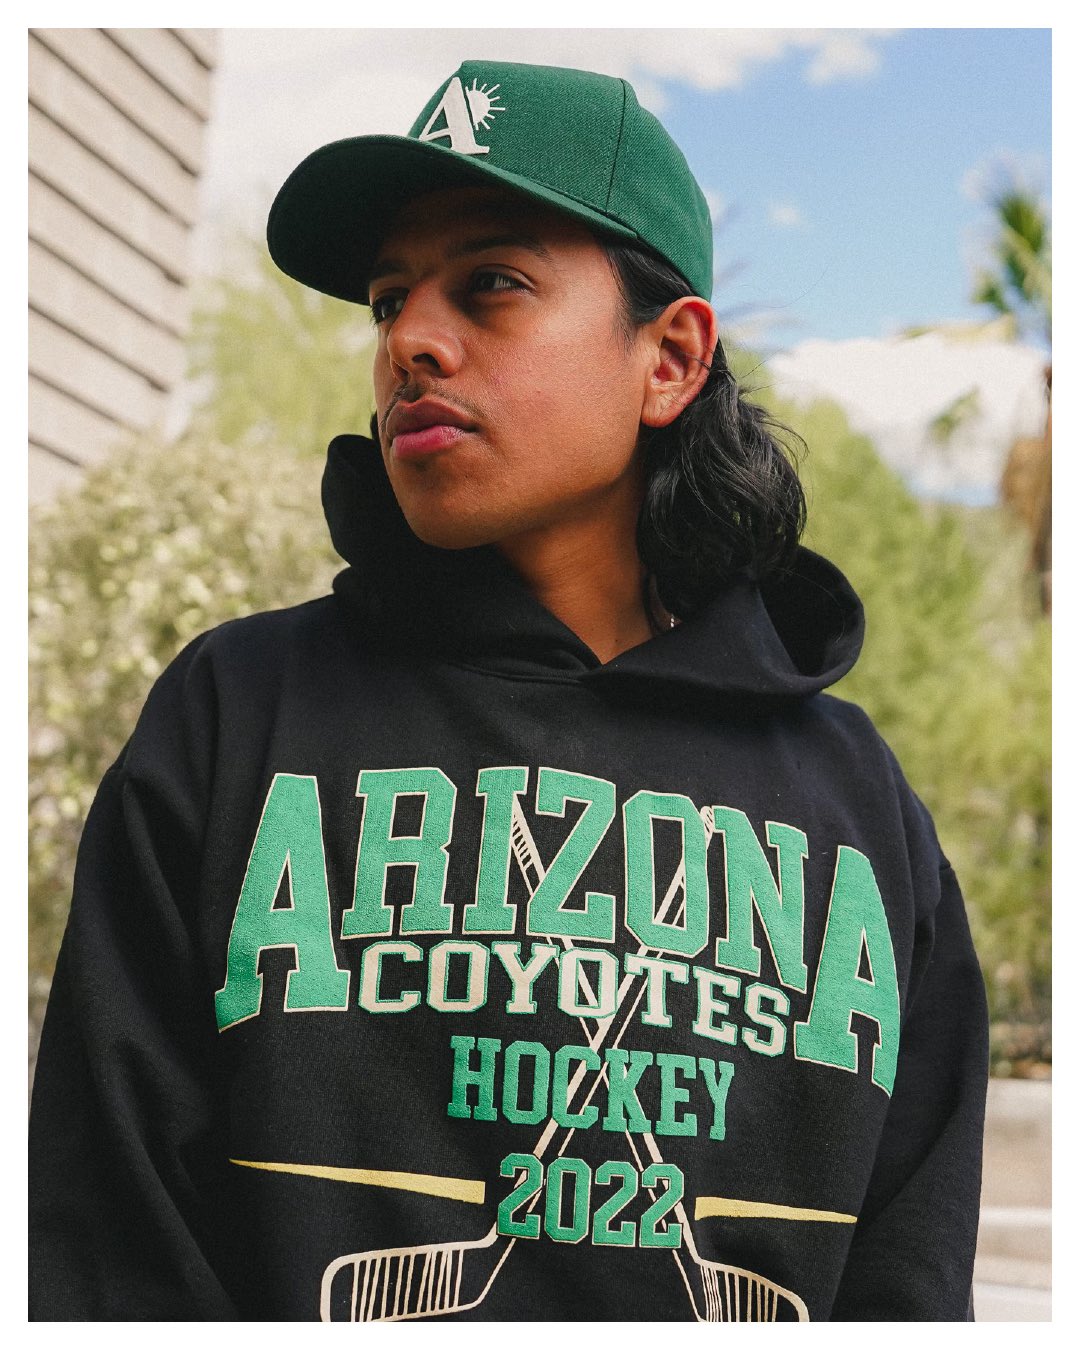 The Coyotes have released Arizona-themed special edition, “Desert Nigh